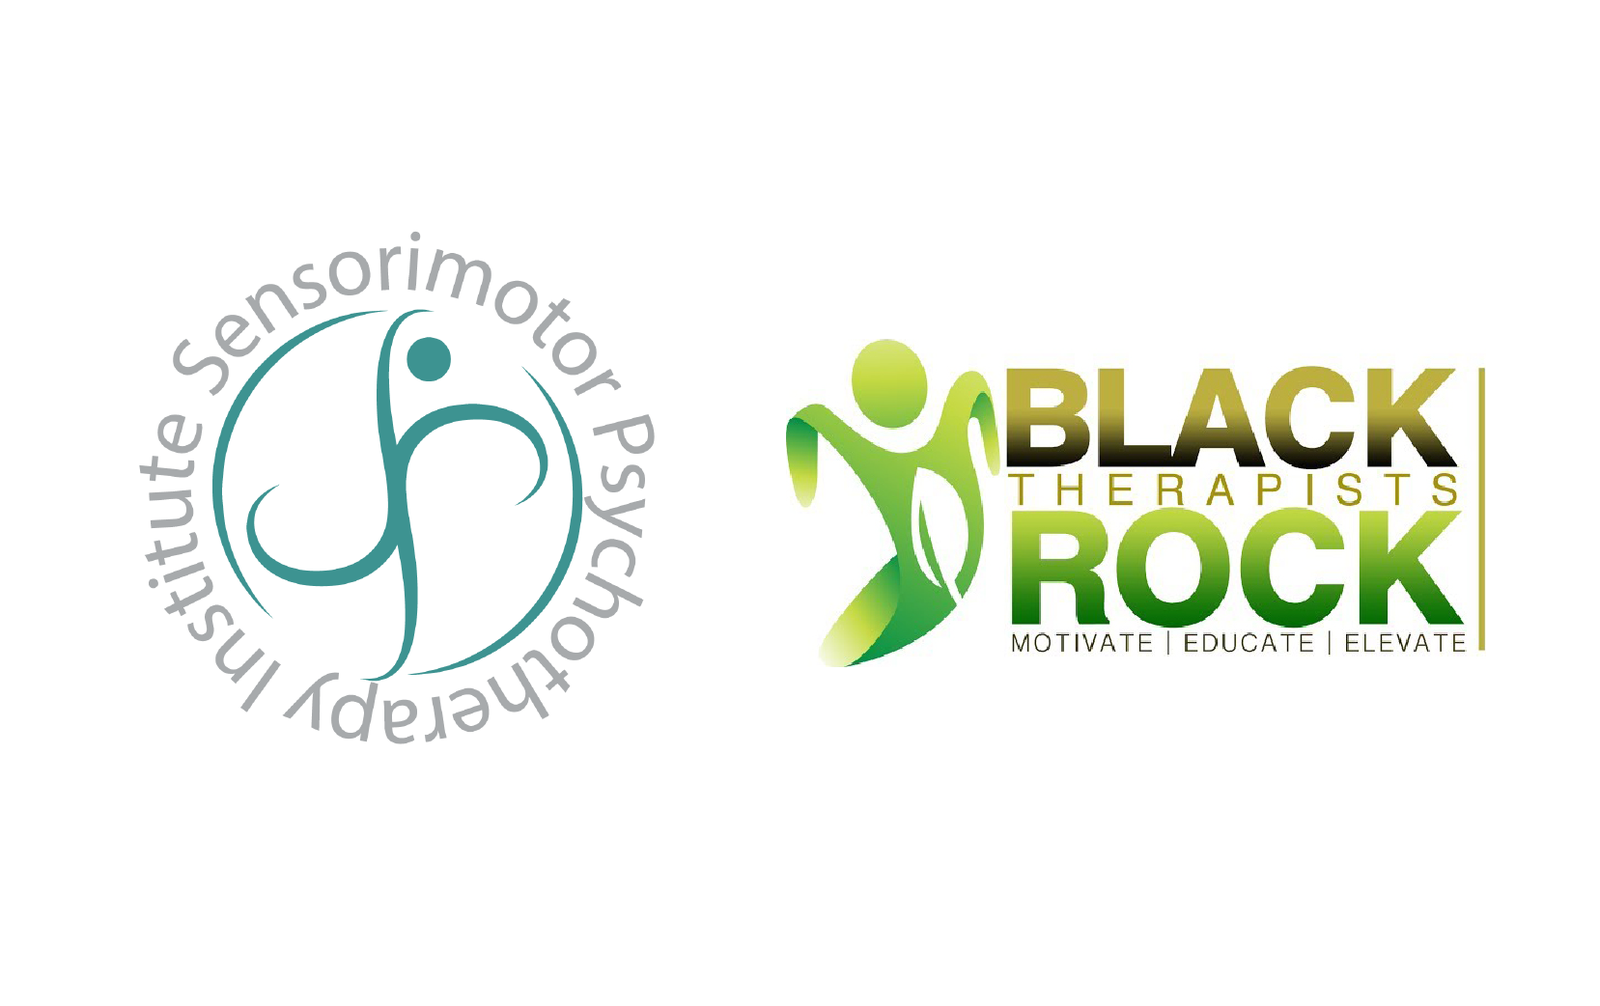 Sensorimotor Psychotherapy Institute (SPI) and Black Therapists Rock (BTR) Enter Into New Collaboration